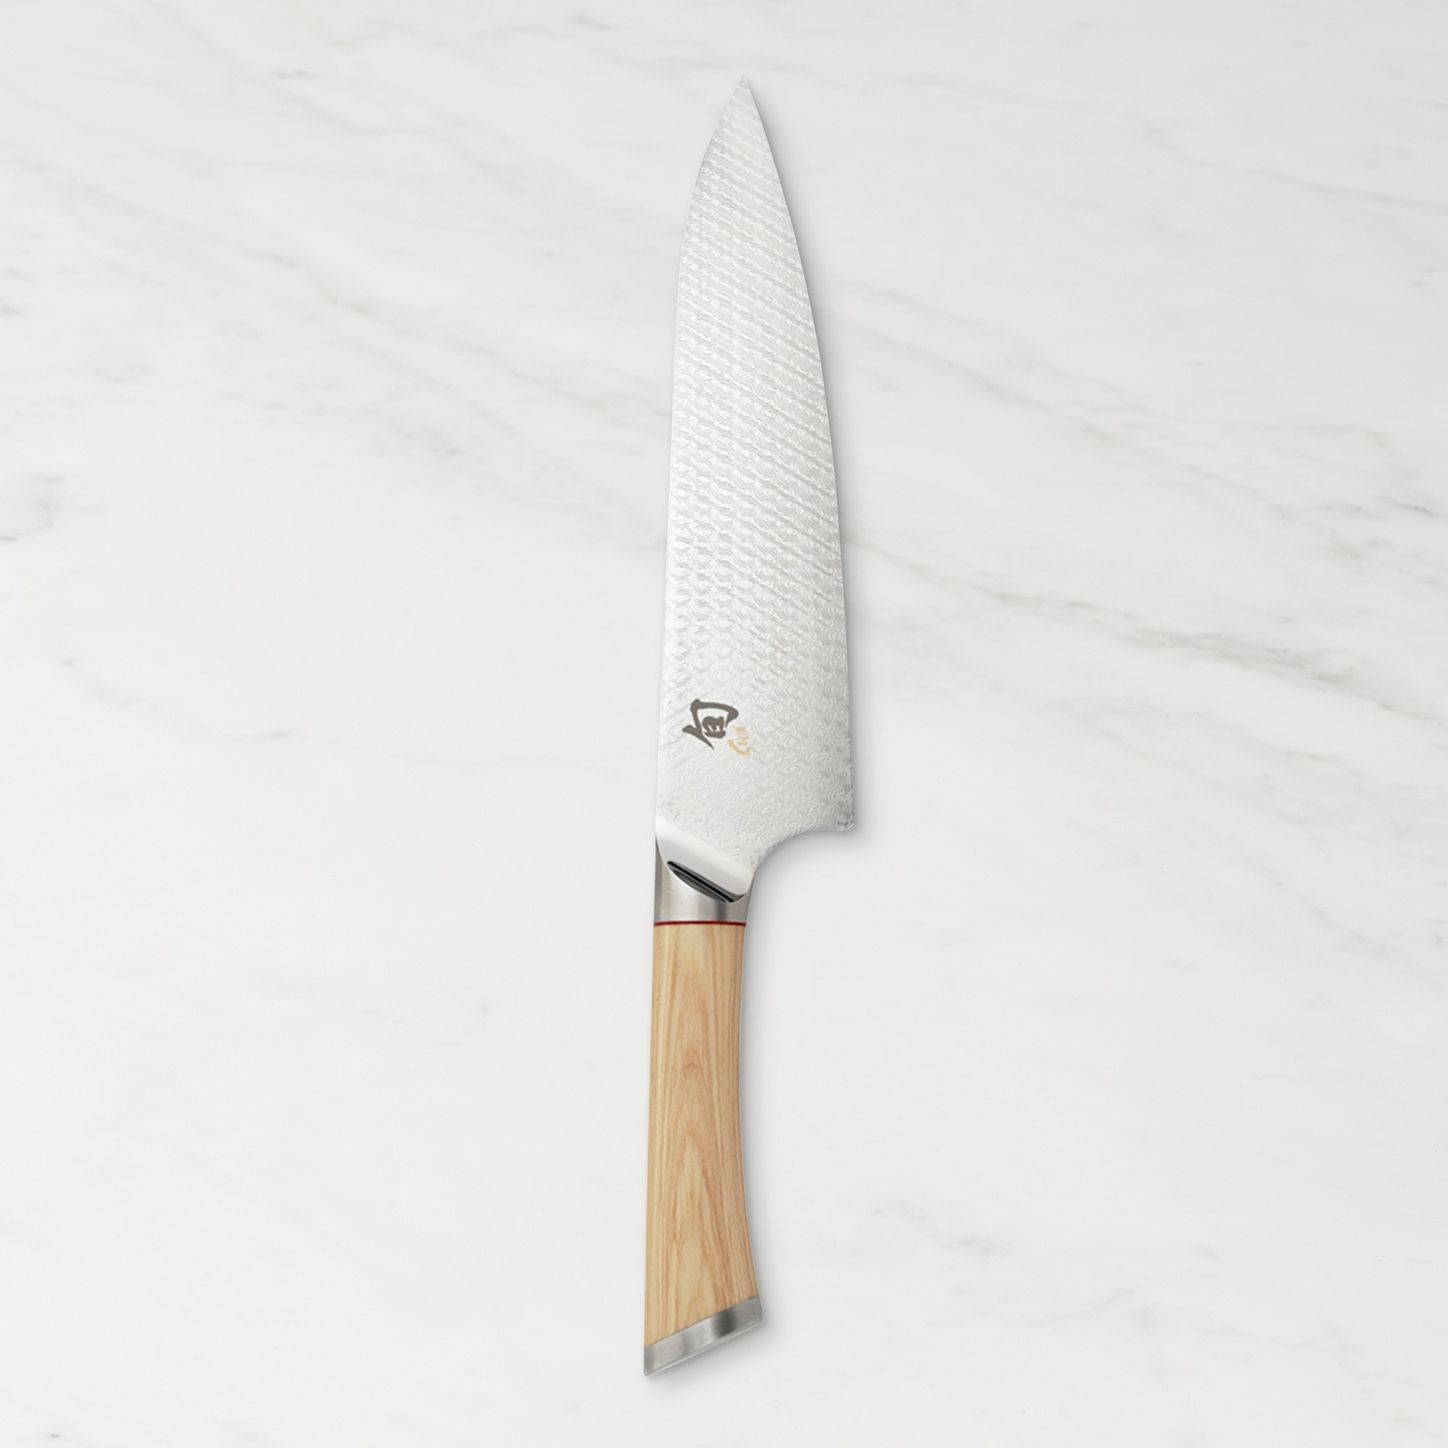 Wüsthof Classic Chef's Knife 6 + Reviews